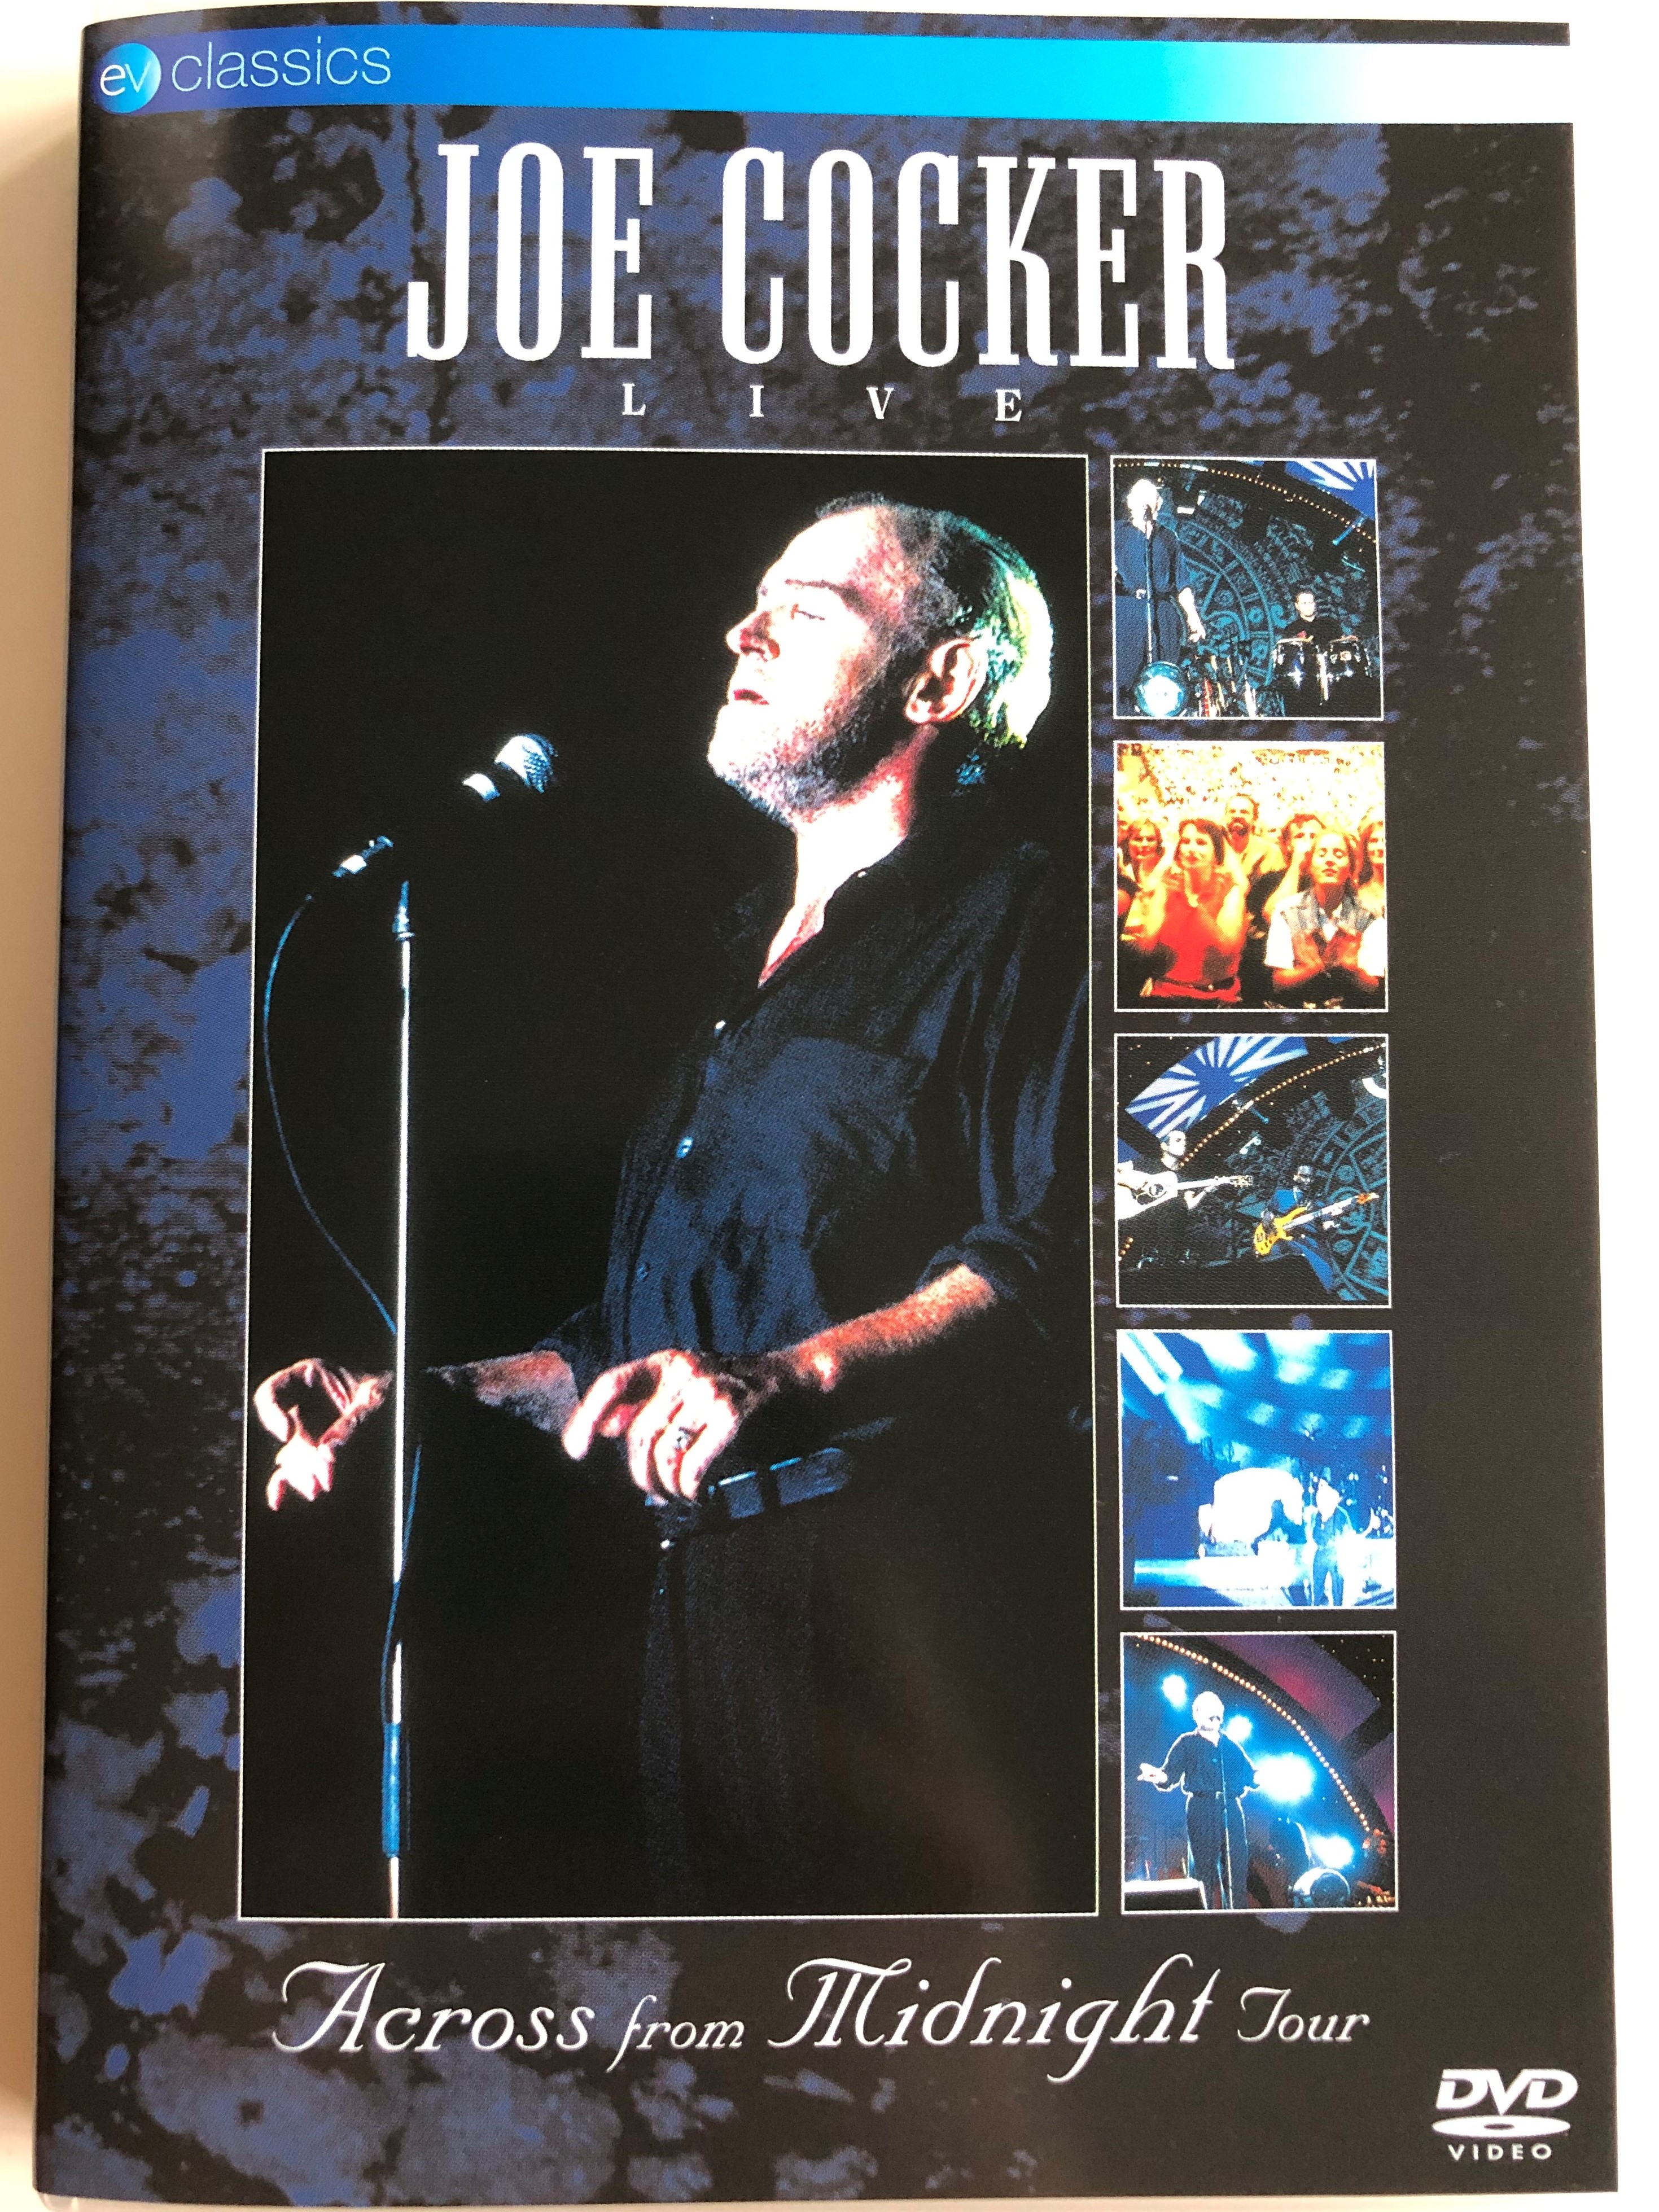 joe-cocker-live-dvd-1997-across-from-the-midnight-tour-directed-by-egbert-van-hees-could-you-be-loved-up-where-we-belong-summer-in-the-city-unchain-my-heart-ev-classics-1-.jpg